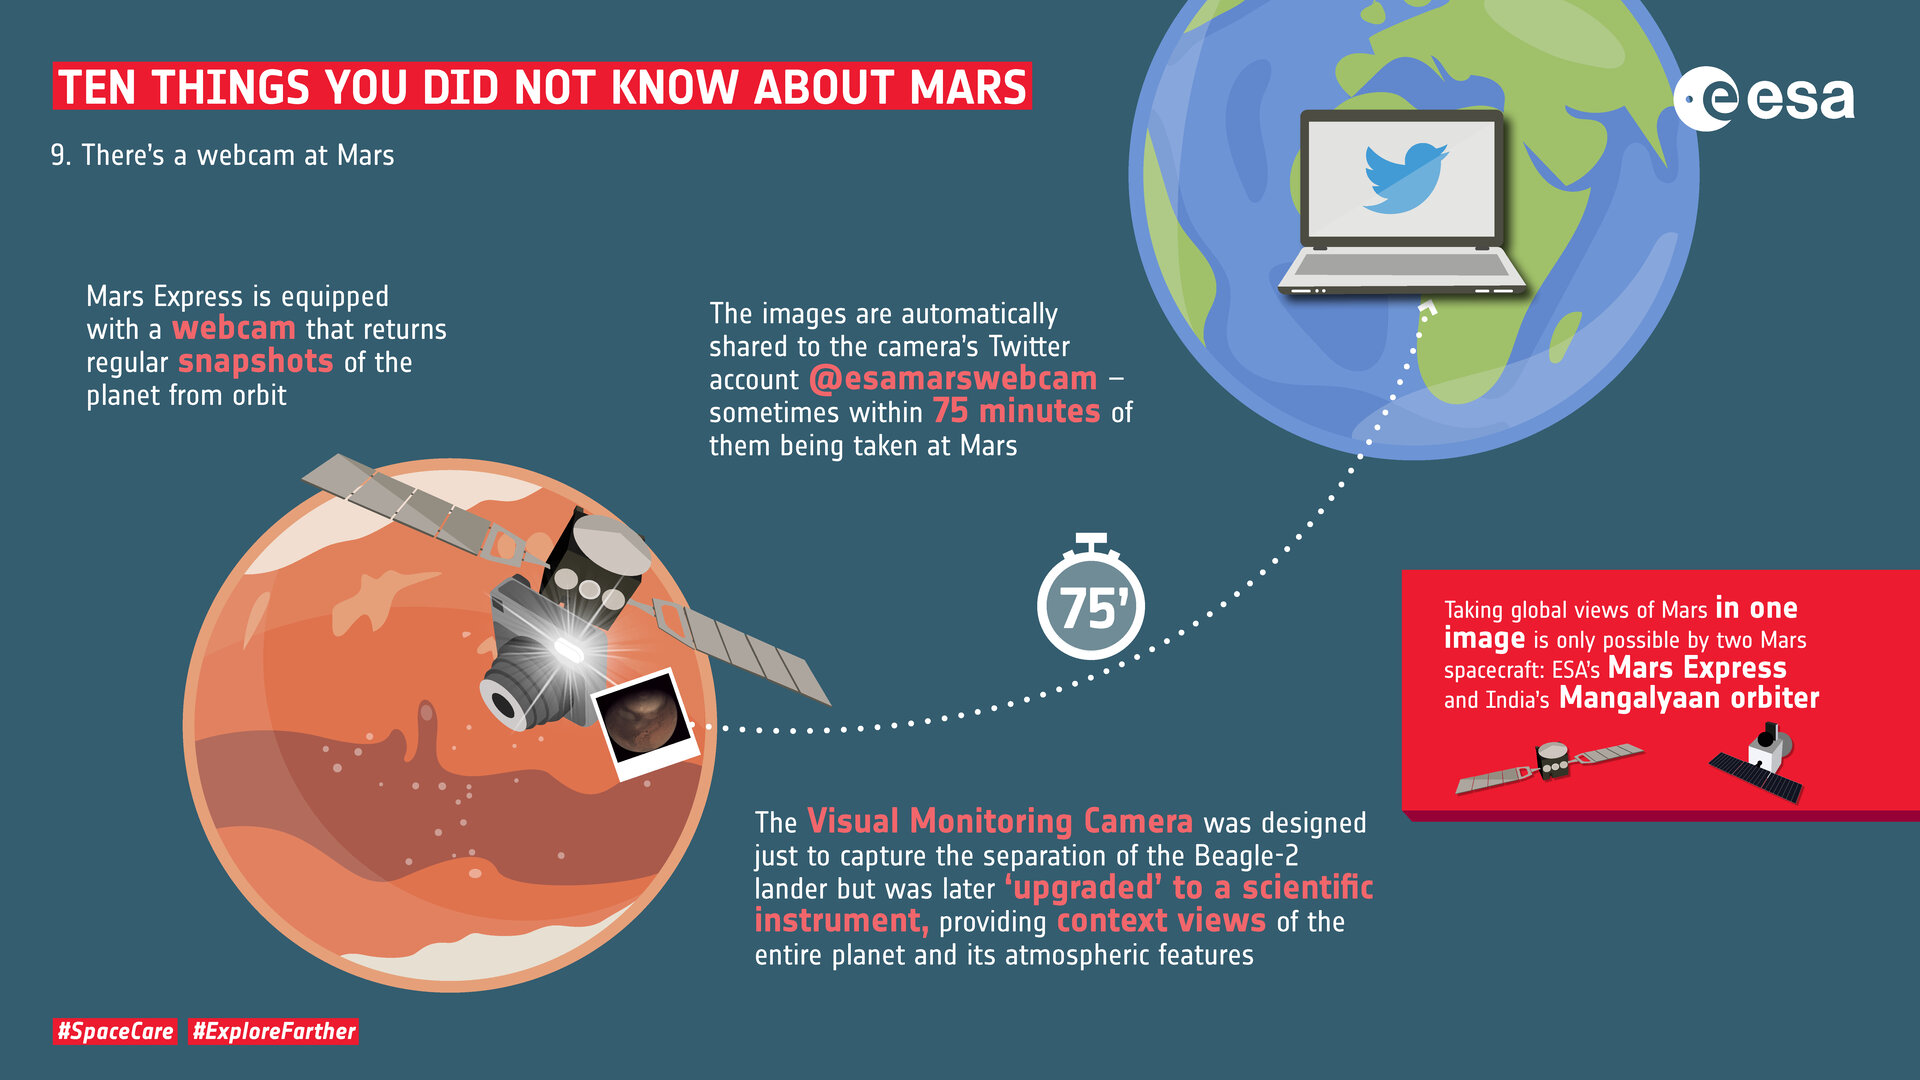 Ten things you did not know about Mars: 9. Instant images